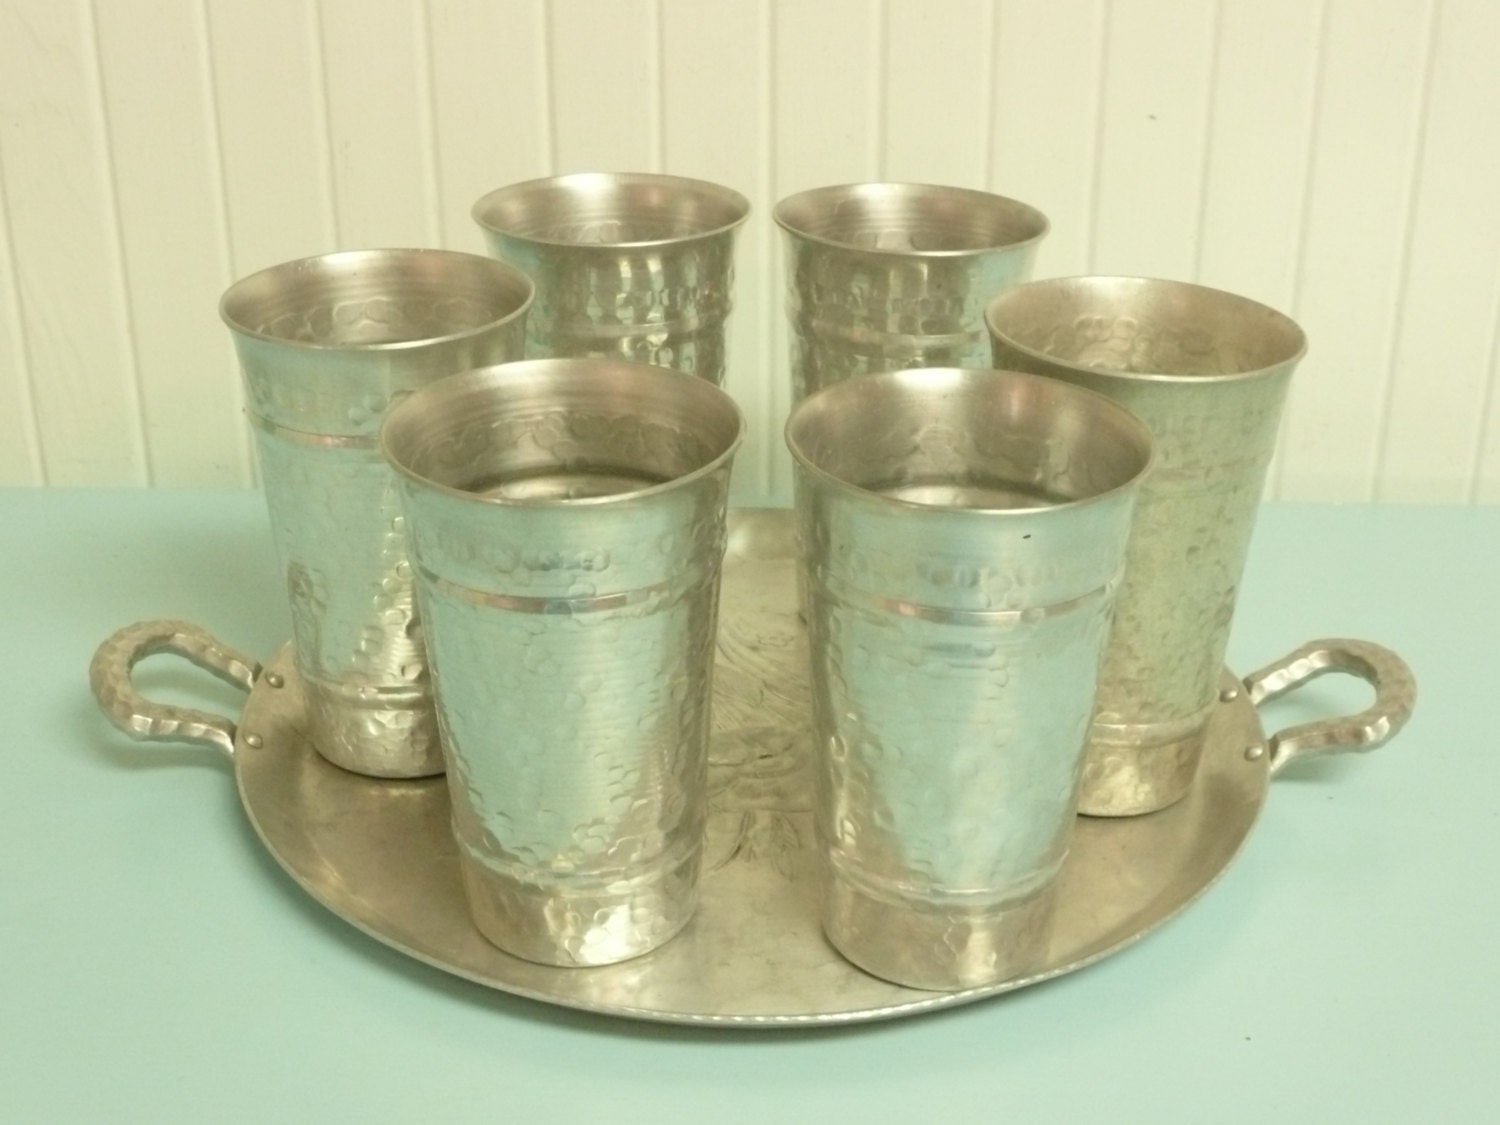 tumblers trays and Tray 1960s Tray Tumblers Set Hand and Aluminum Forged